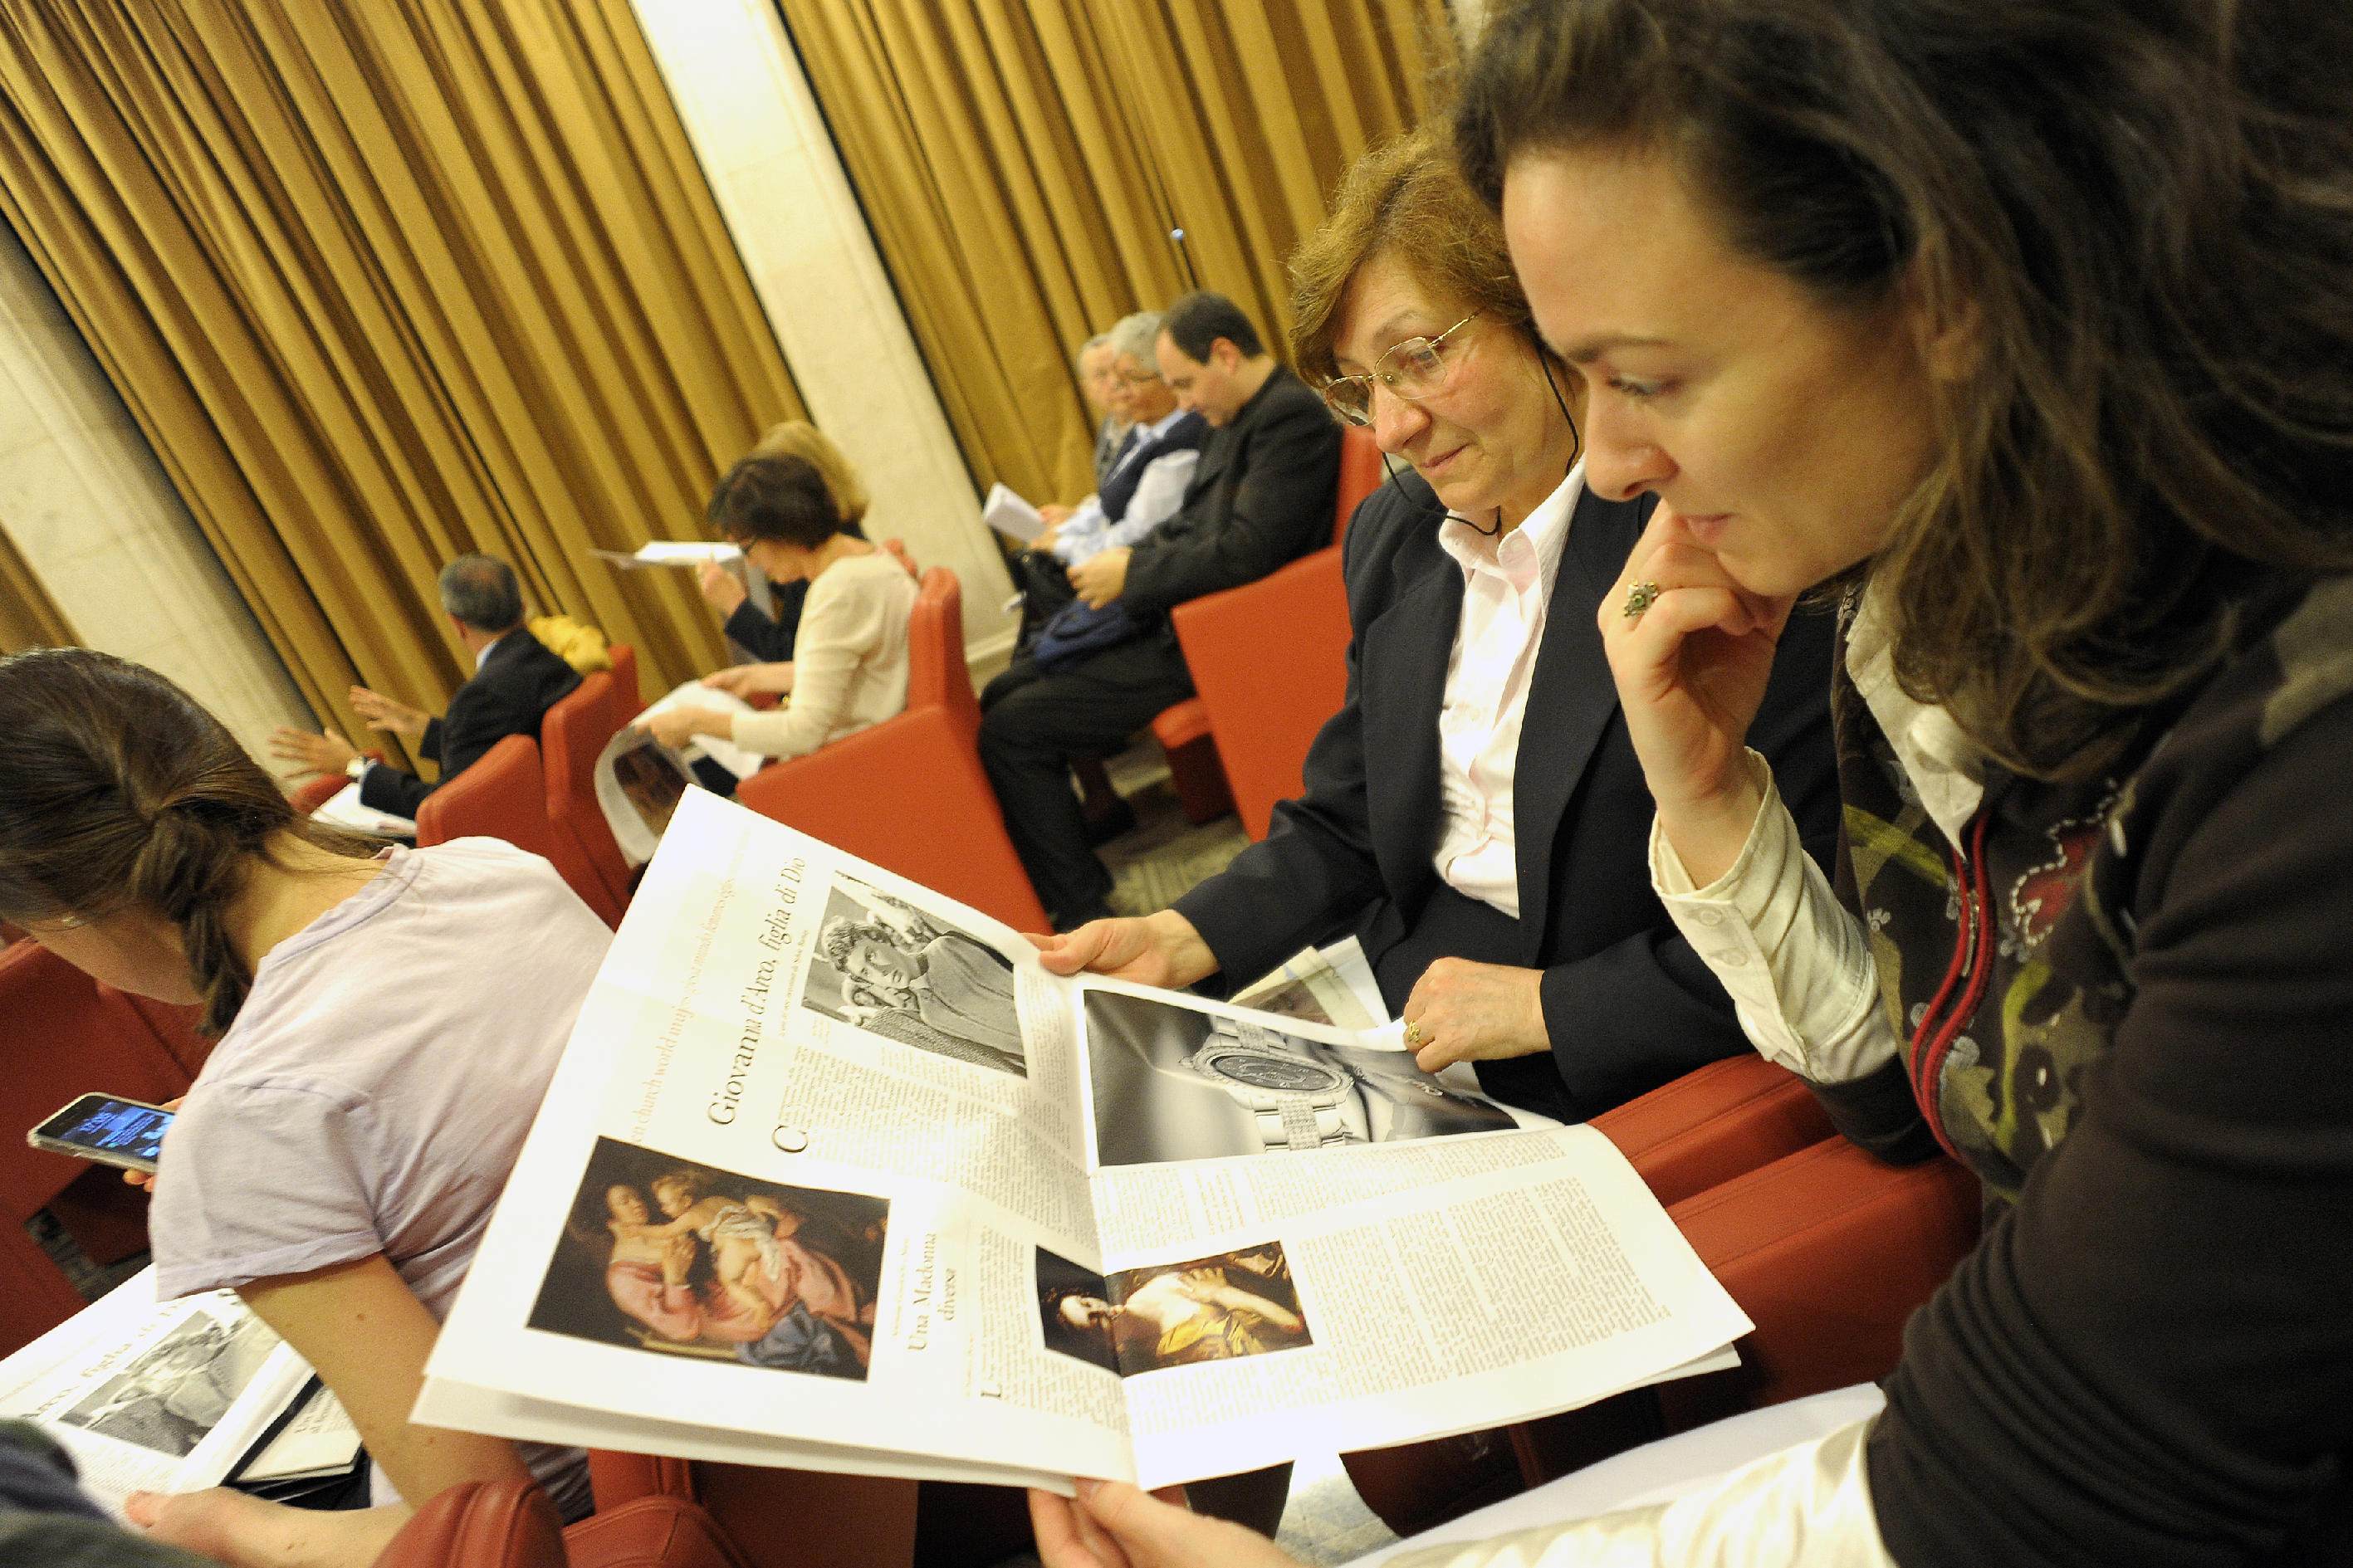 Founder and editorial staff of Vatican women's magazine resign